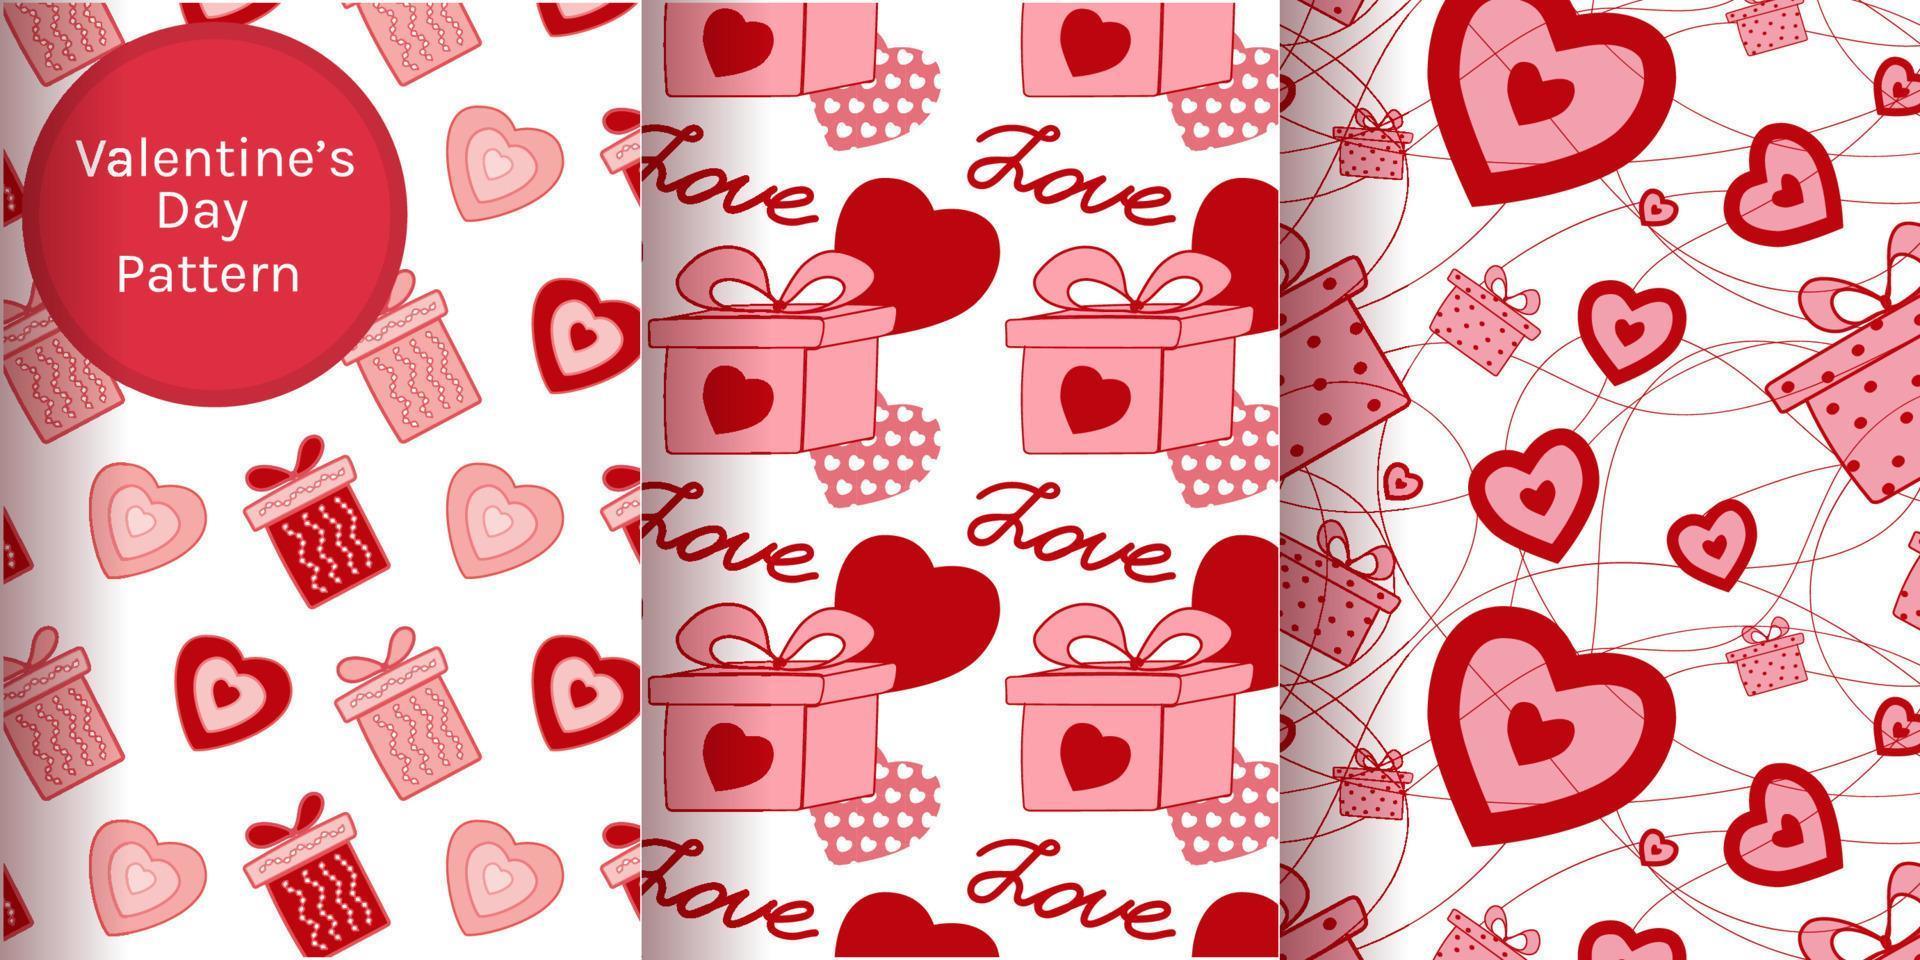 Seamless pattern with hearts and gifts. Vector illustration. Romantic print for valentines day.